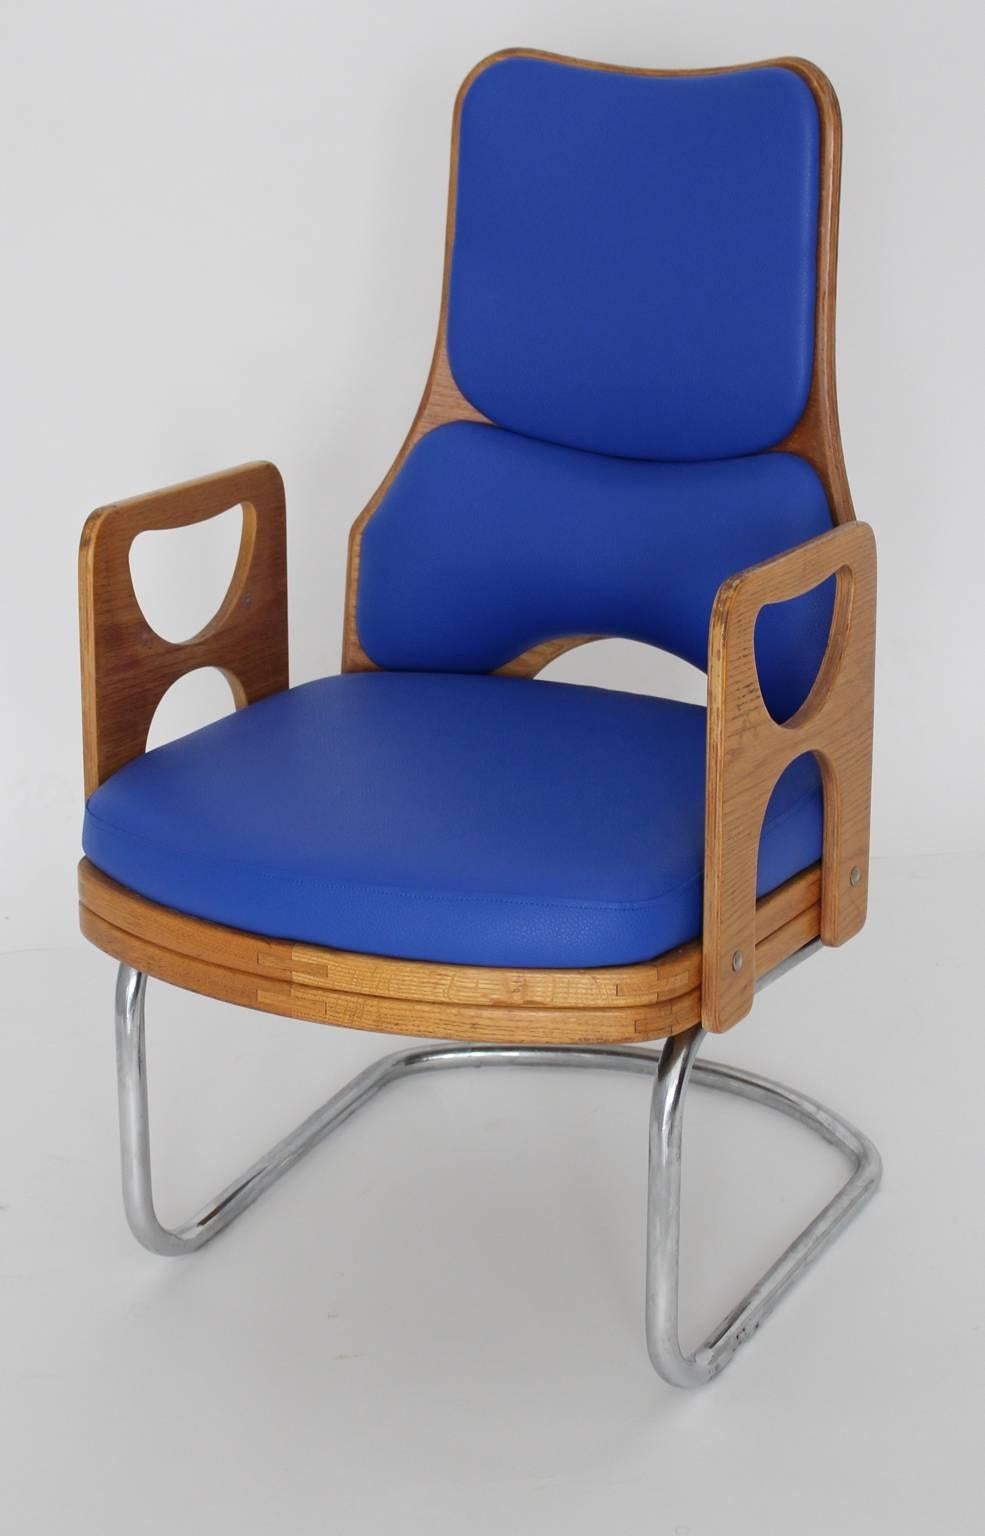 Space Age Blue Vintage Teak Armchair or Lounge Chair 1960s In Good Condition For Sale In Vienna, AT